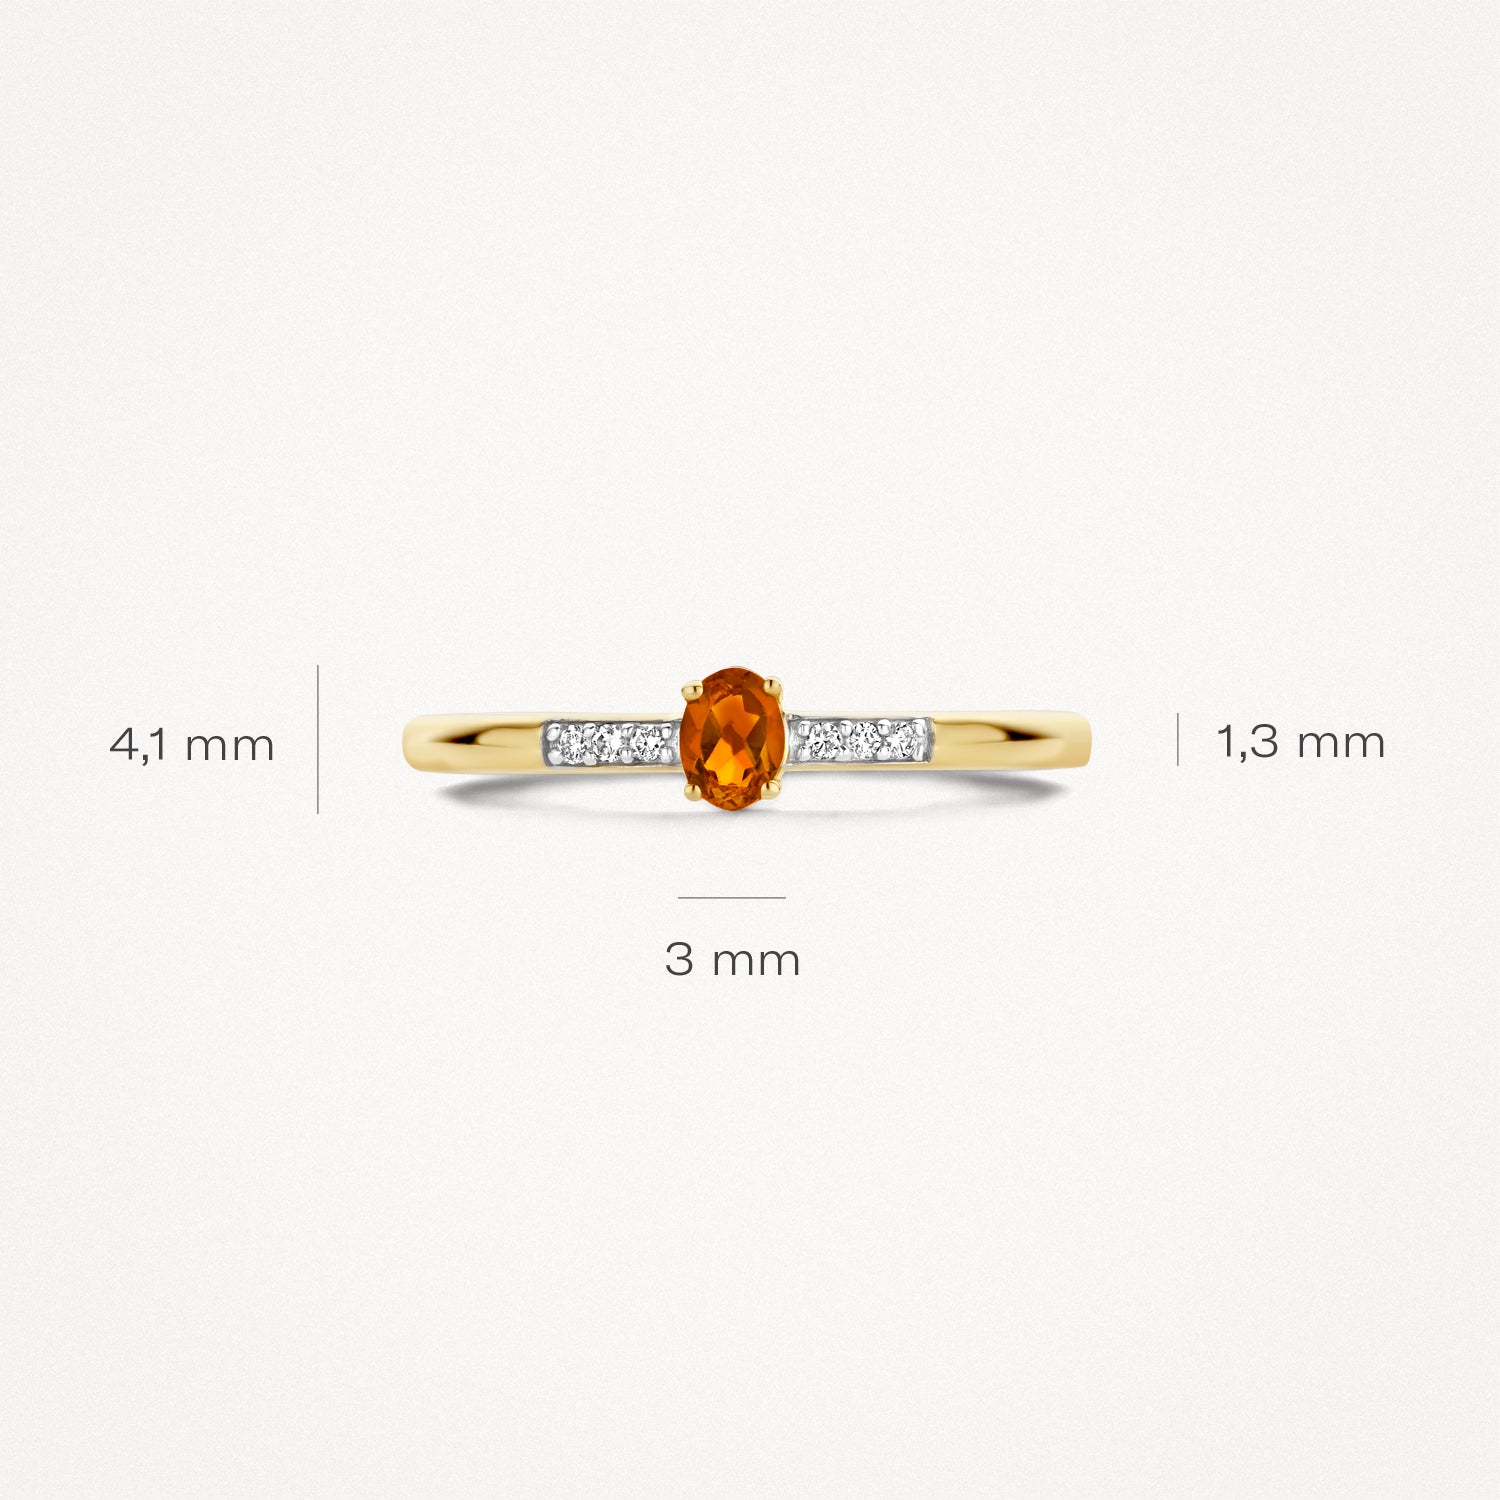 Ring 1637YDC - 14k Yellow and white gold with diamond and citrine